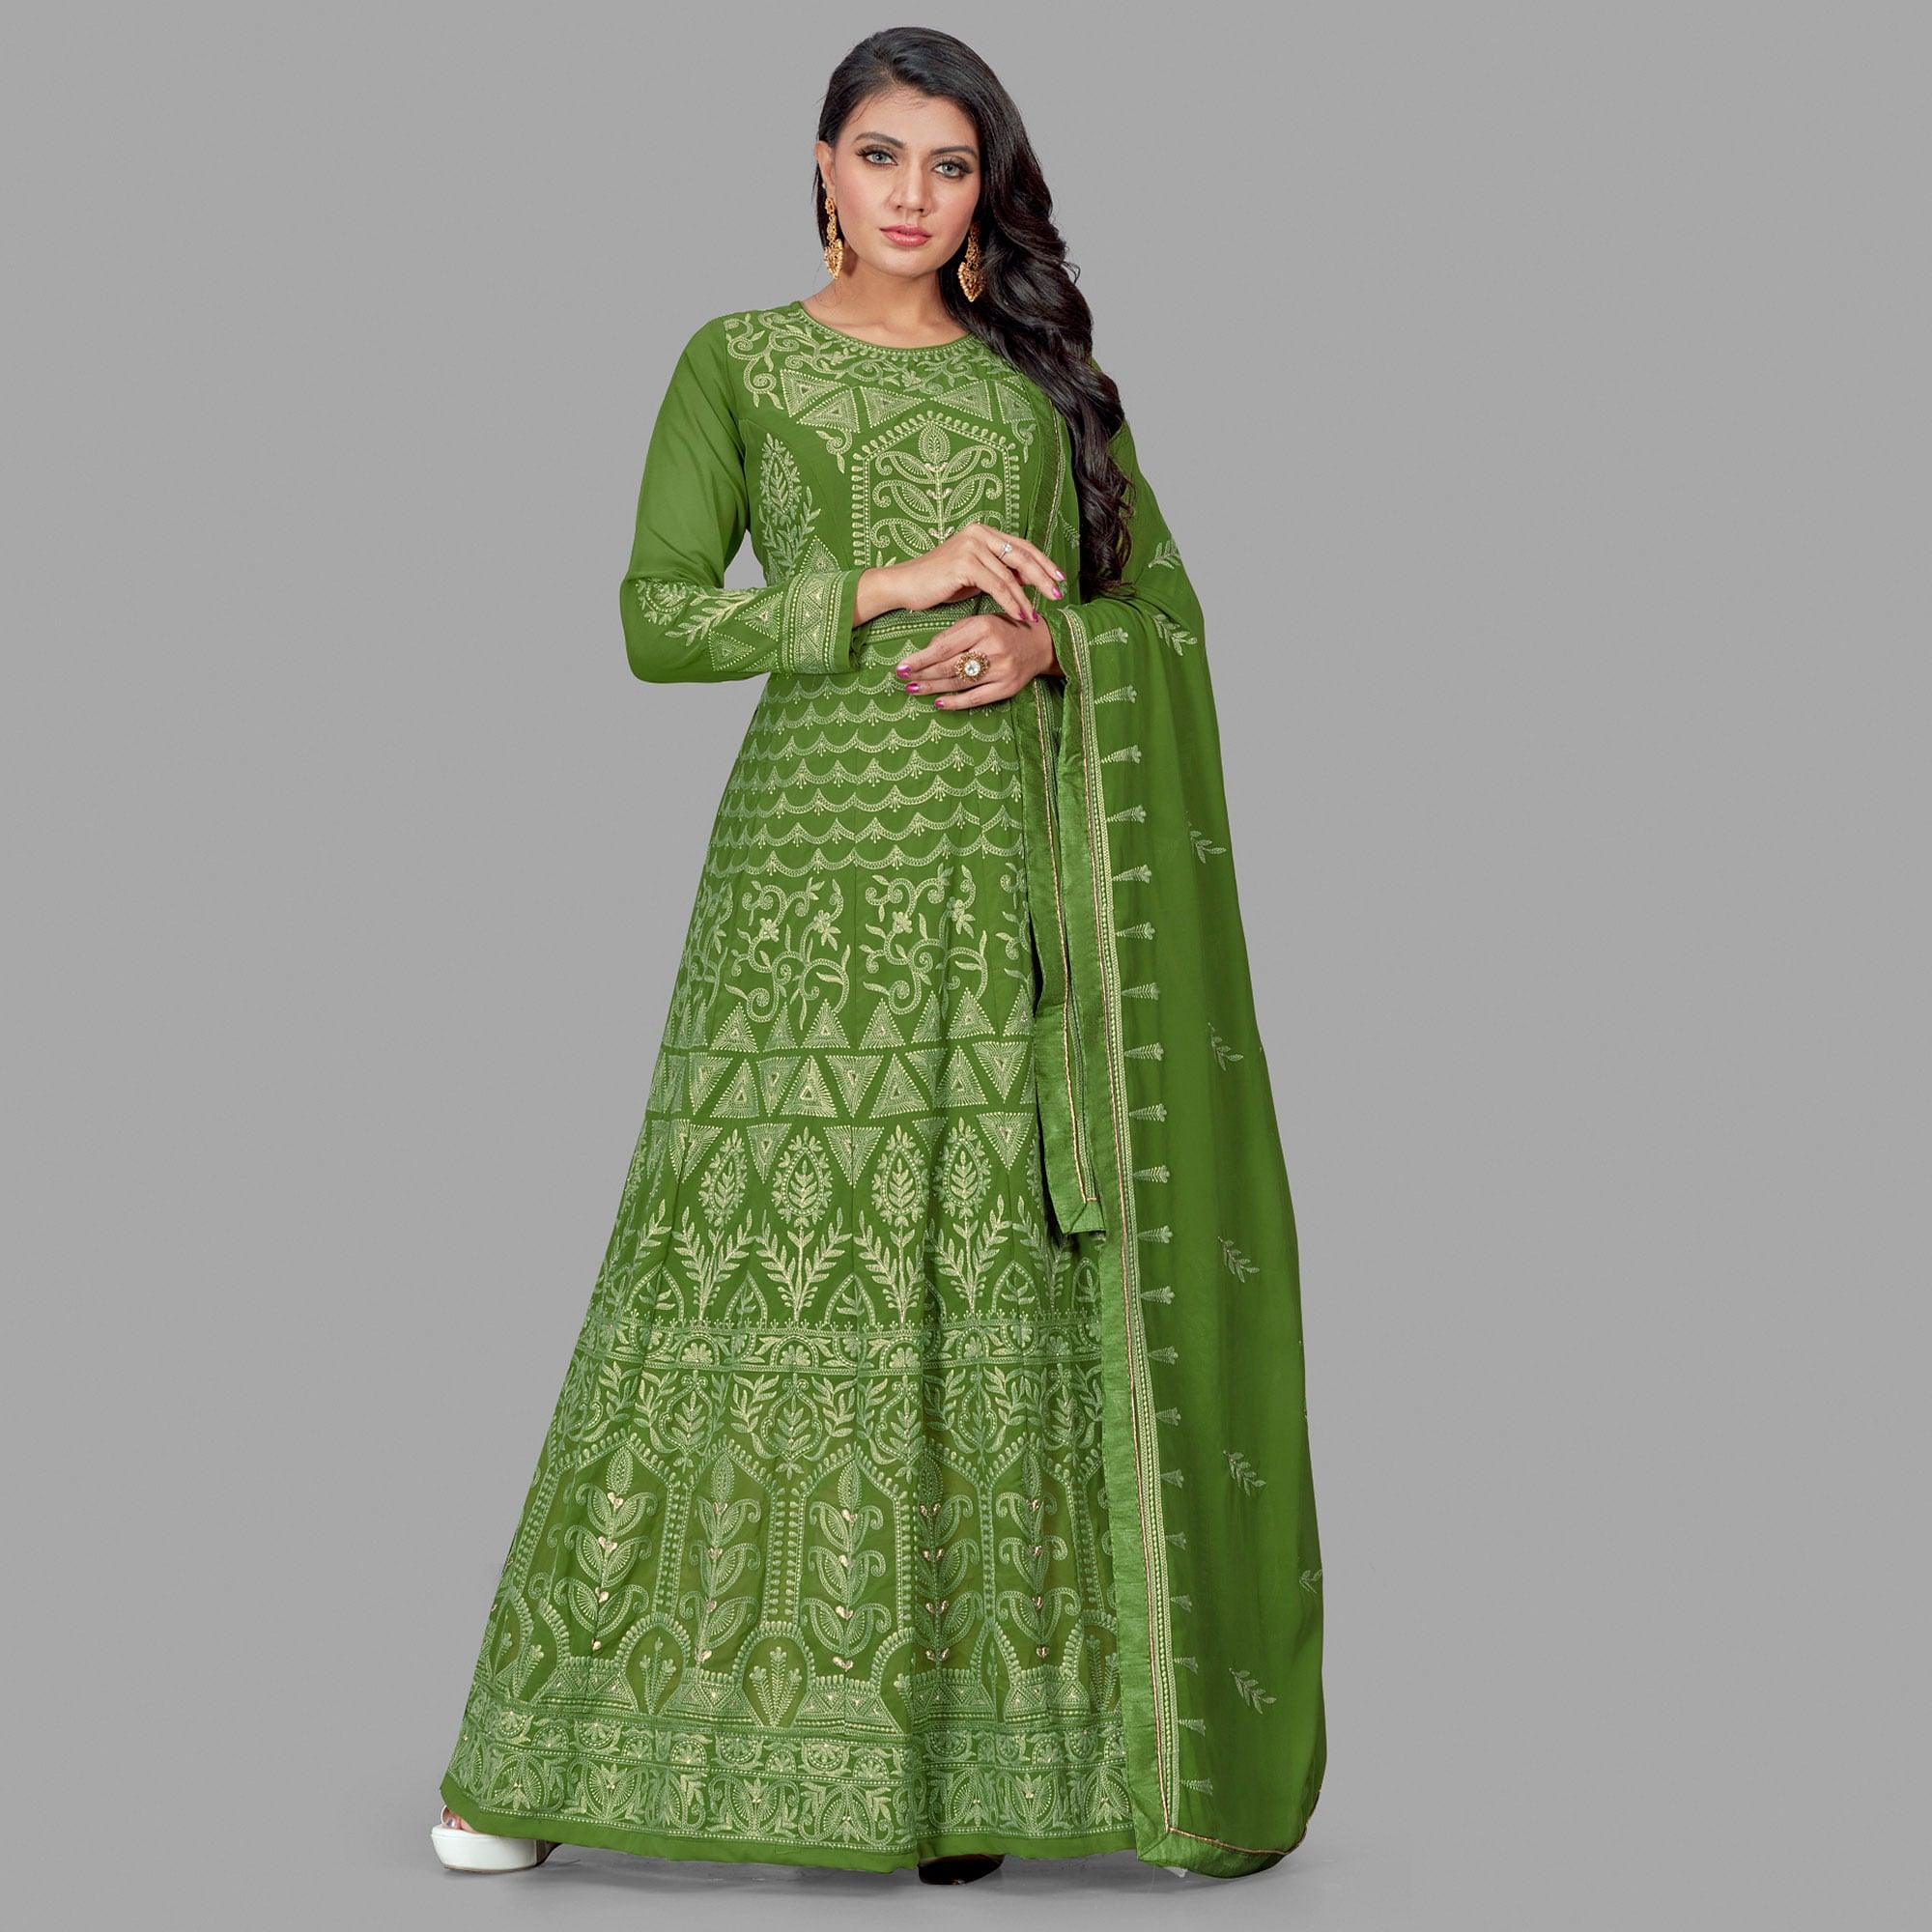 Charming Green Colored Party Wear Embroidered Heavy Faux Georgette Anarkali Suit - Peachmode